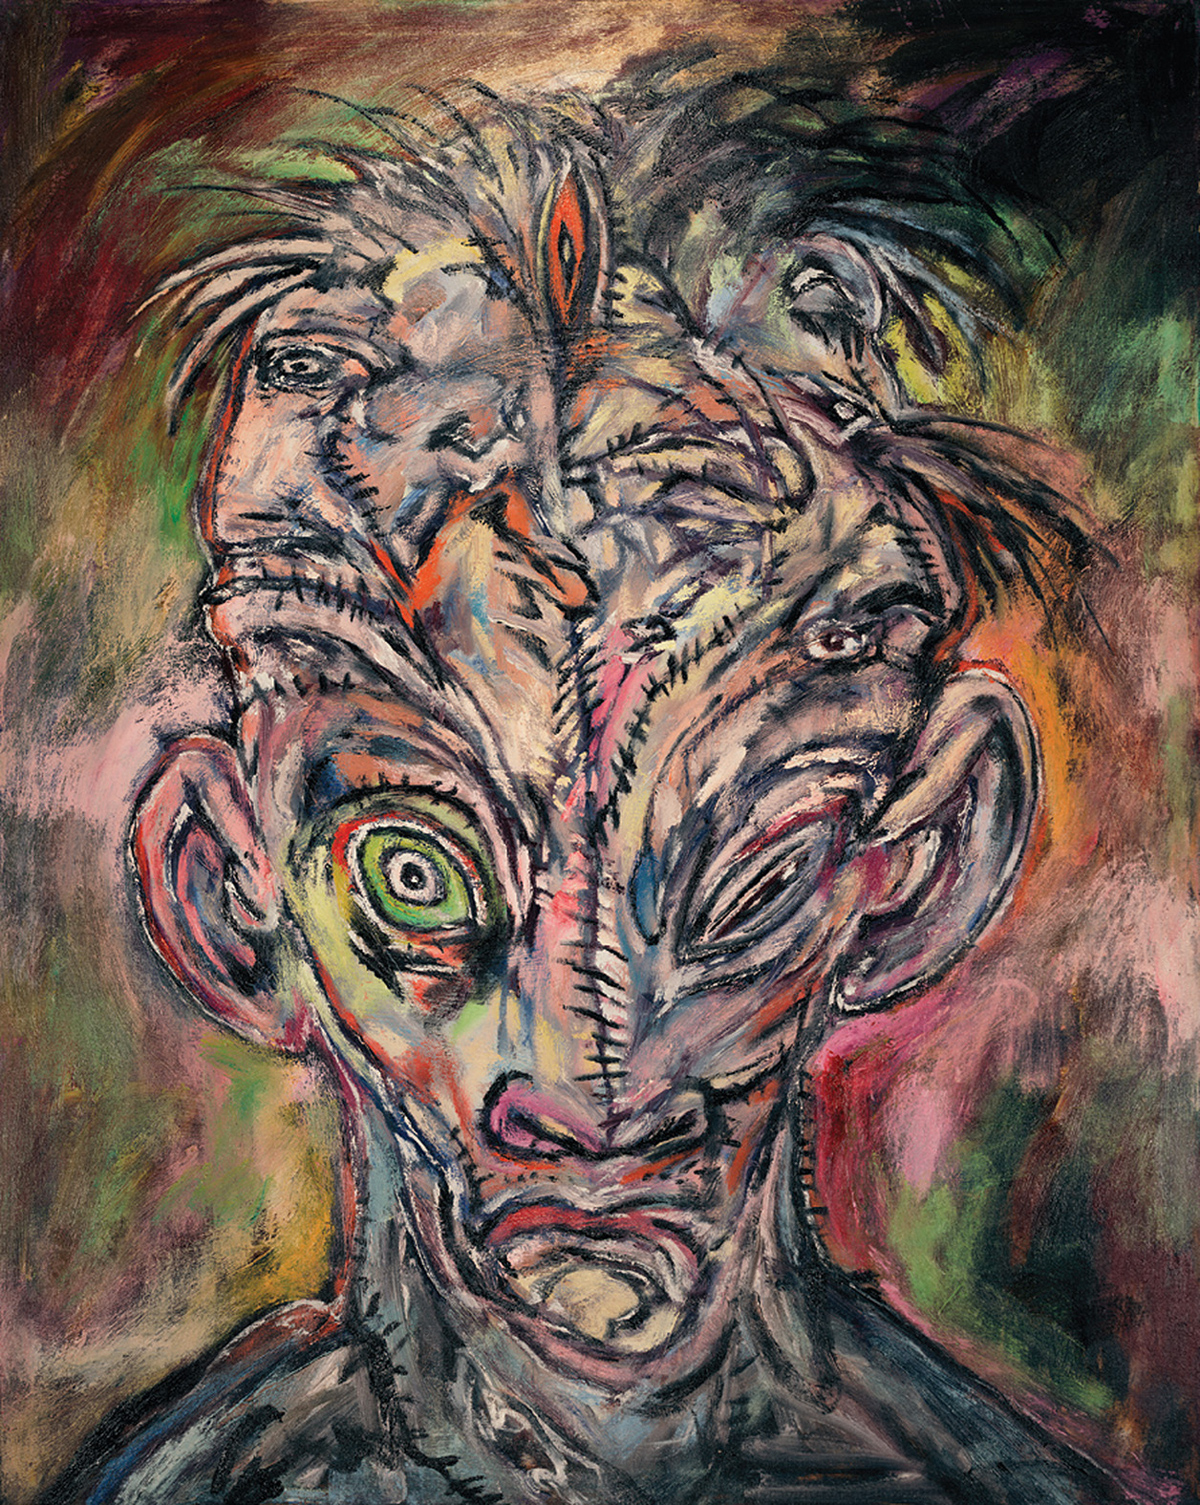 Clive-Barker-Paintings-Dissension.